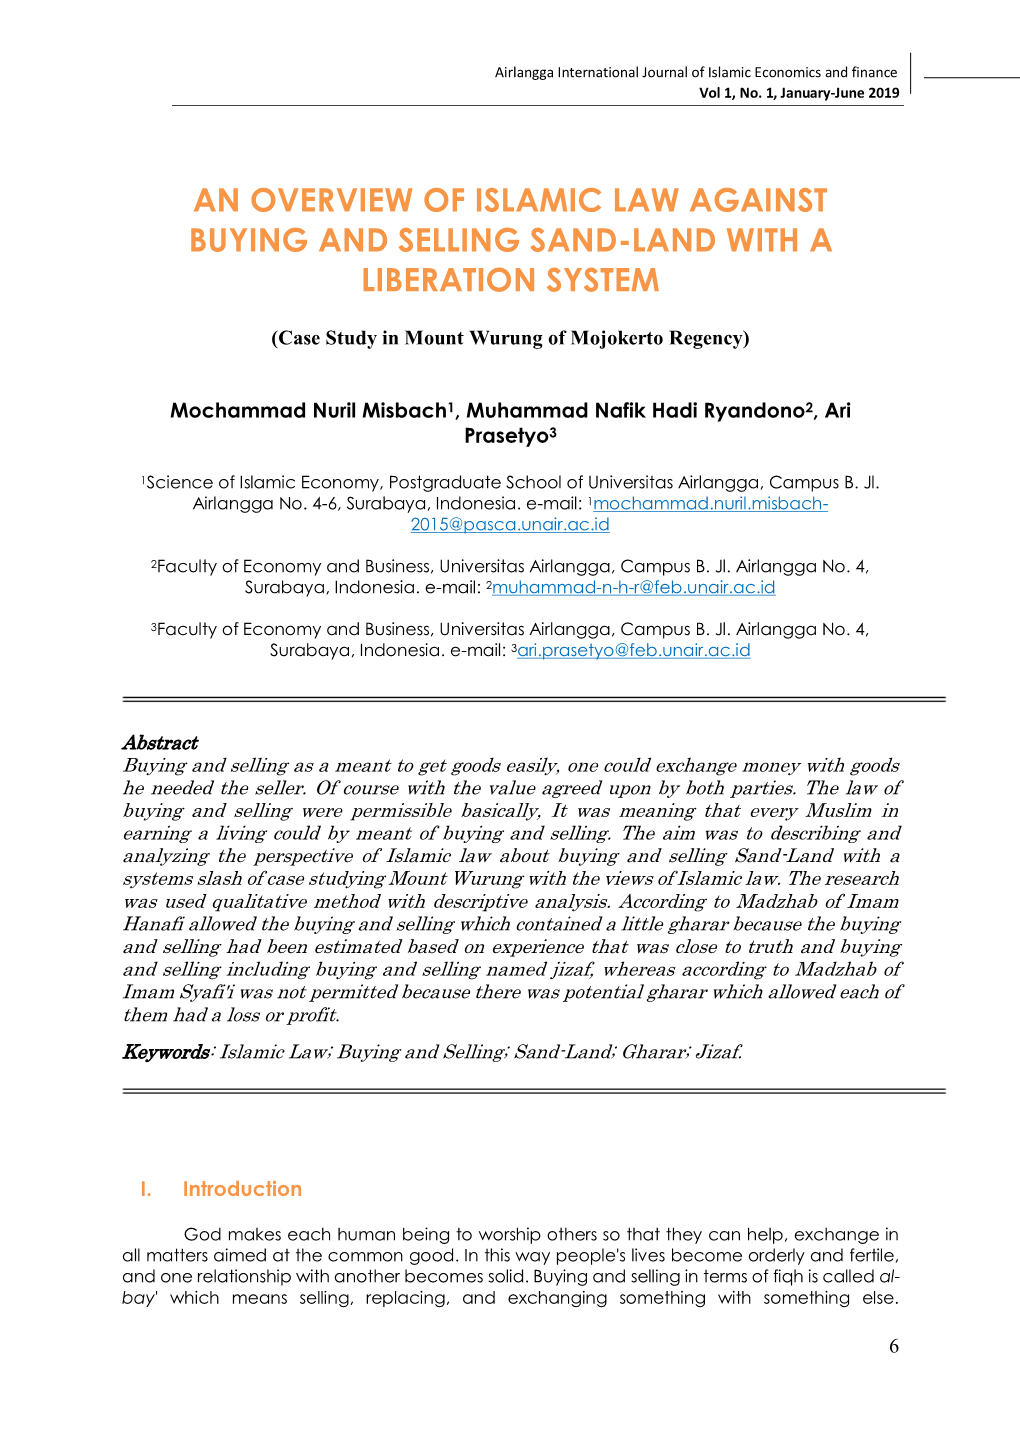 An Overview of Islamic Law Against Buying and Selling Sand-Land with a Liberation System